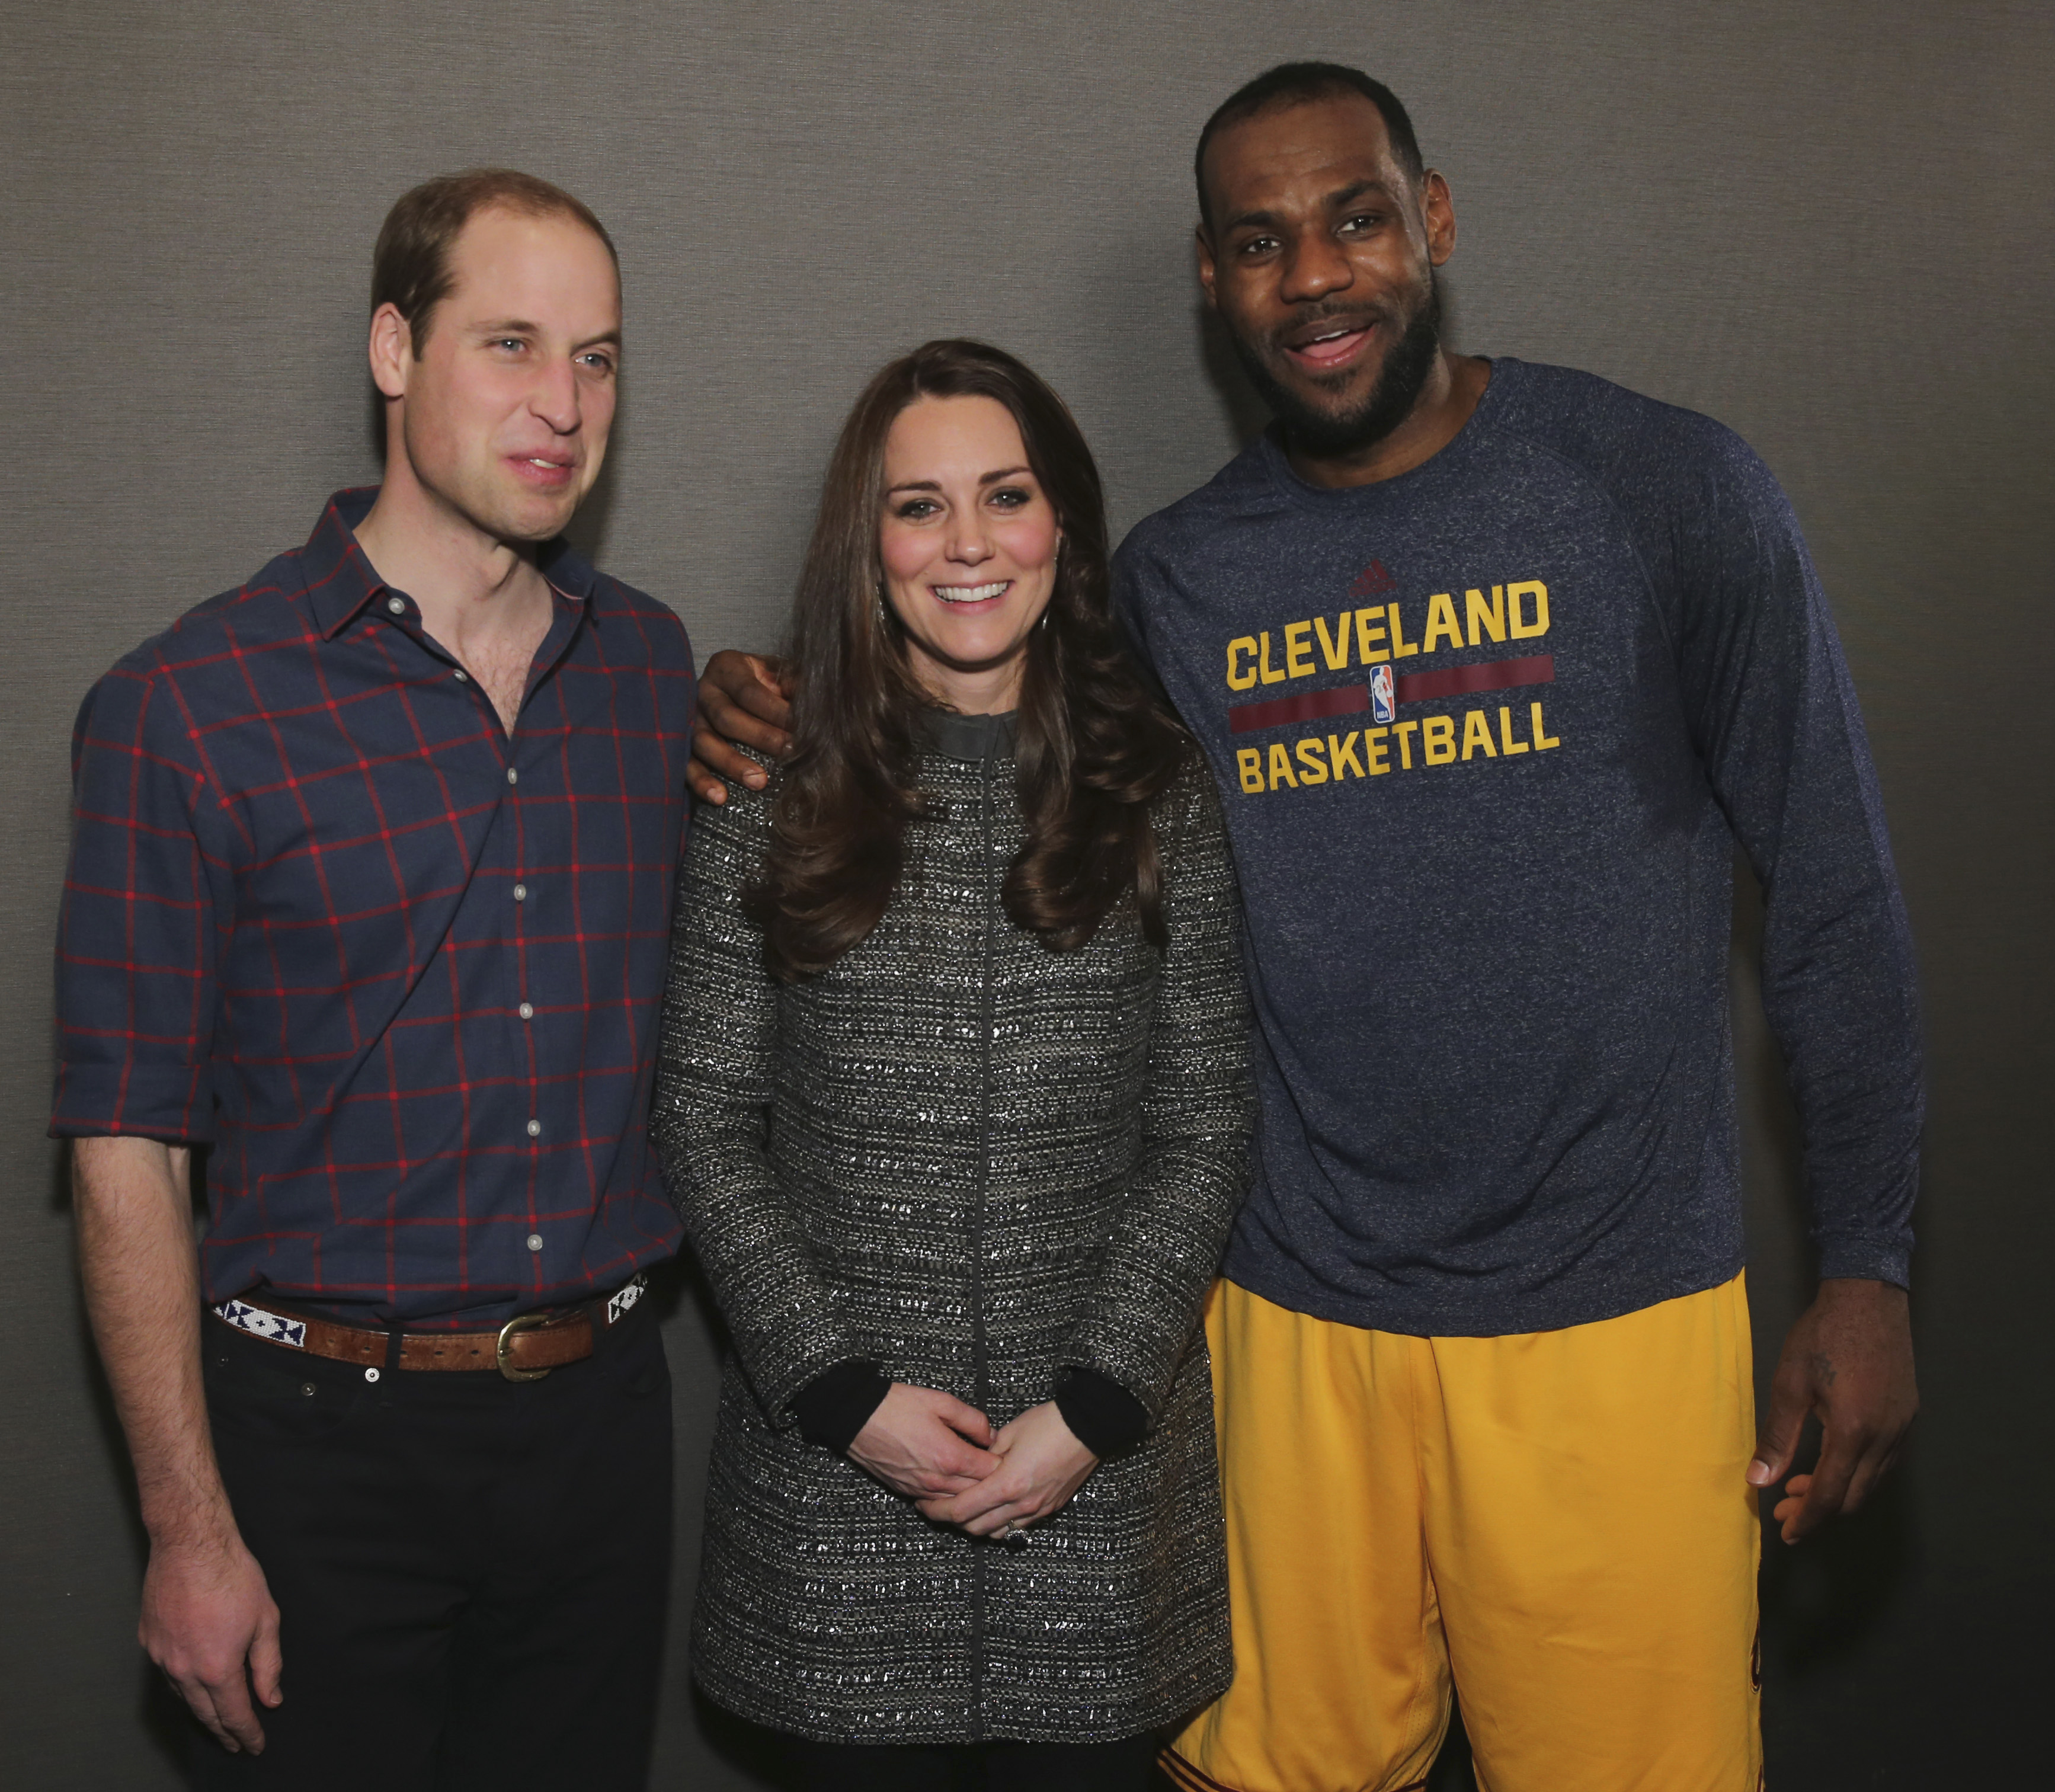 Britain's Prince William, left, and Kate, Duchess of Cambridge pose with Cleveland Cavaliers' LeBron James, right, backstage of an NBA basketball game between the Cavaliers and the Brooklyn Nets on Monday, Dec. 8, 2014, in New York. (AP Photo/Neilson Barnard, Pool)